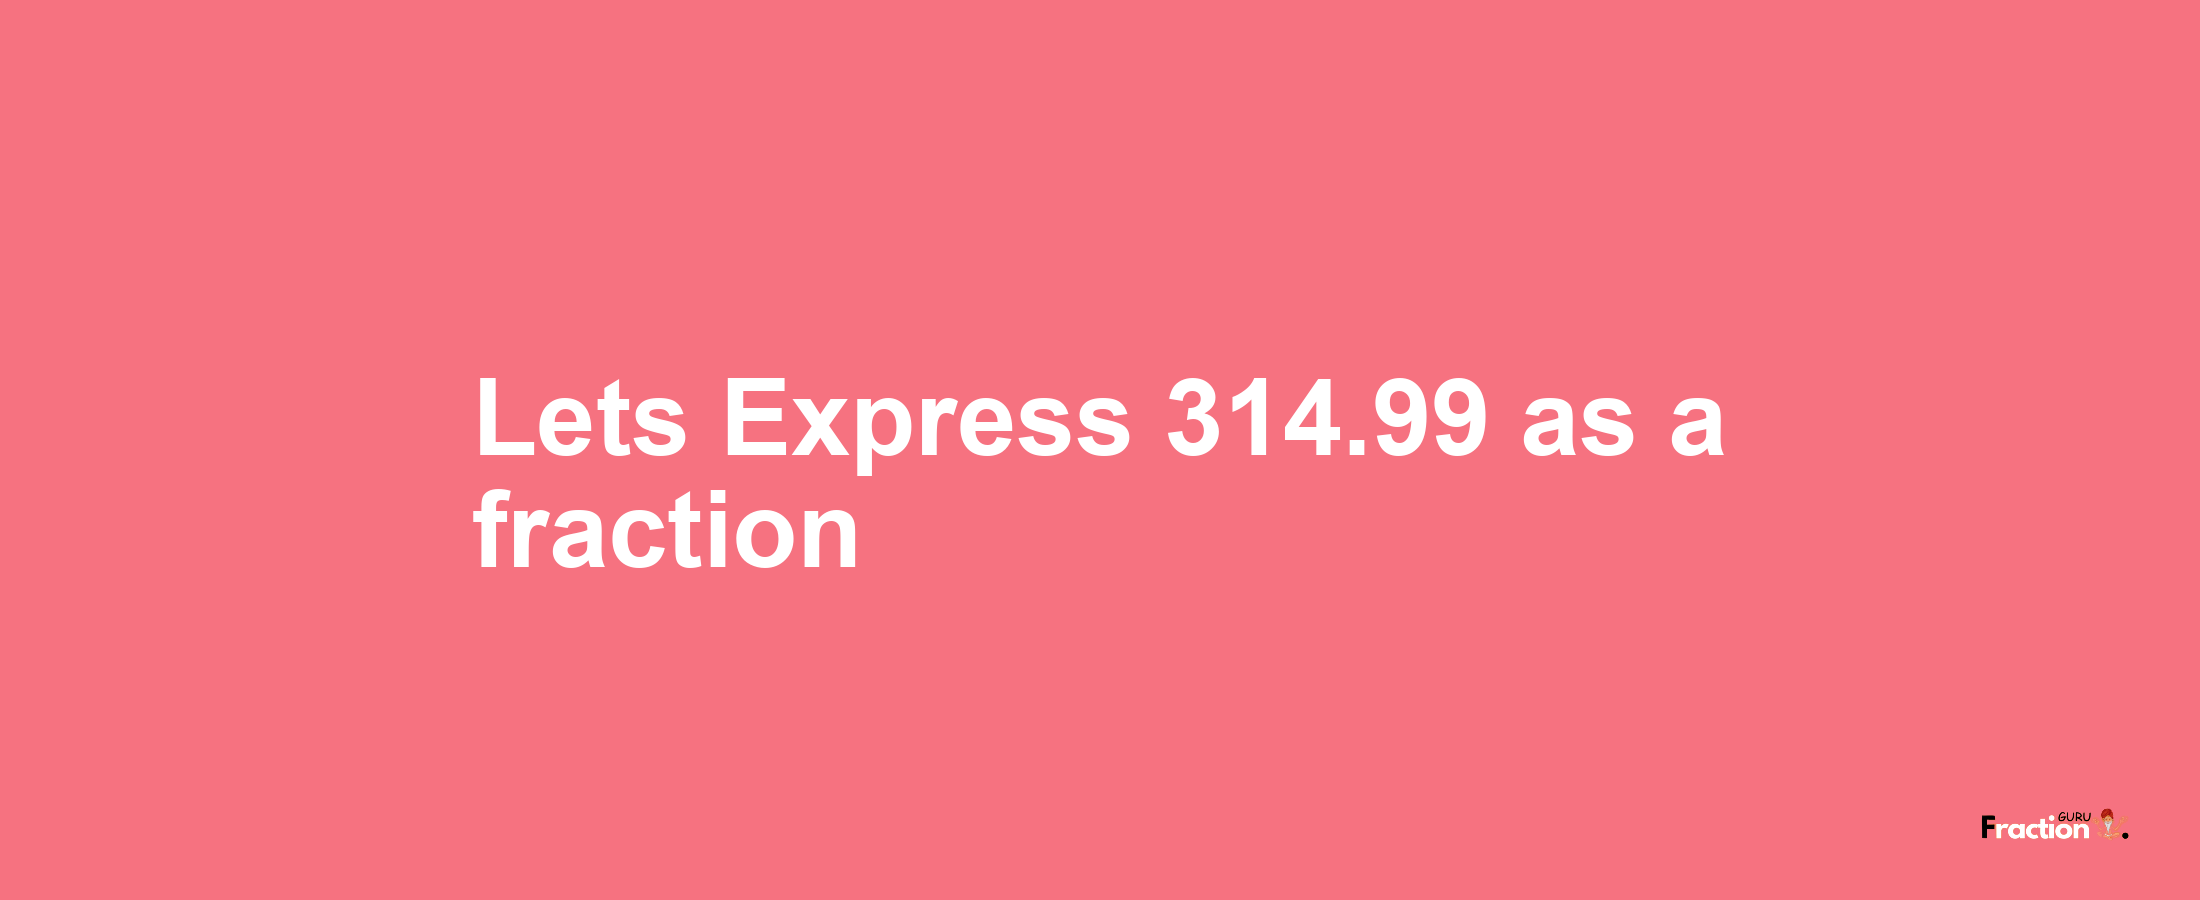 Lets Express 314.99 as afraction